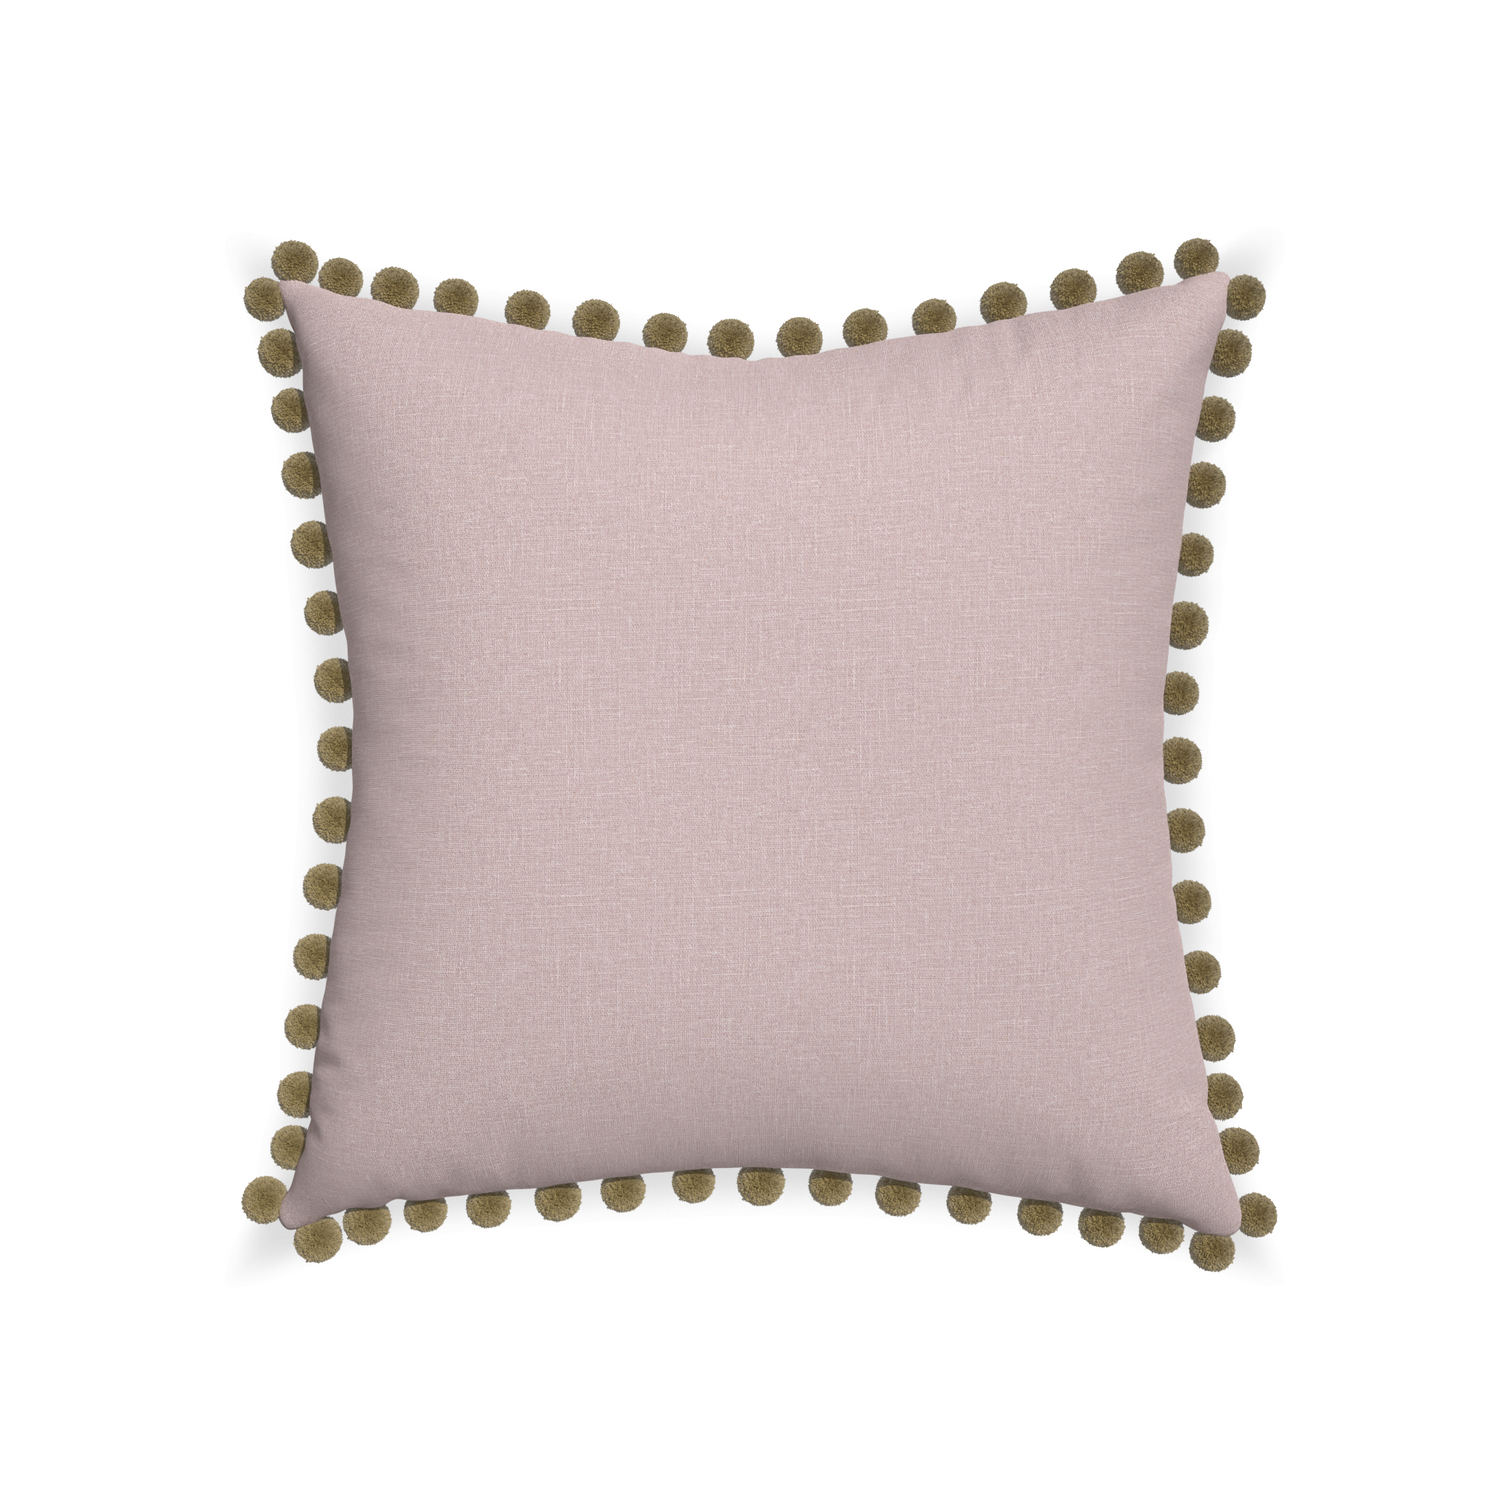 22-square orchid custom mauve pinkpillow with olive pom pom on white background